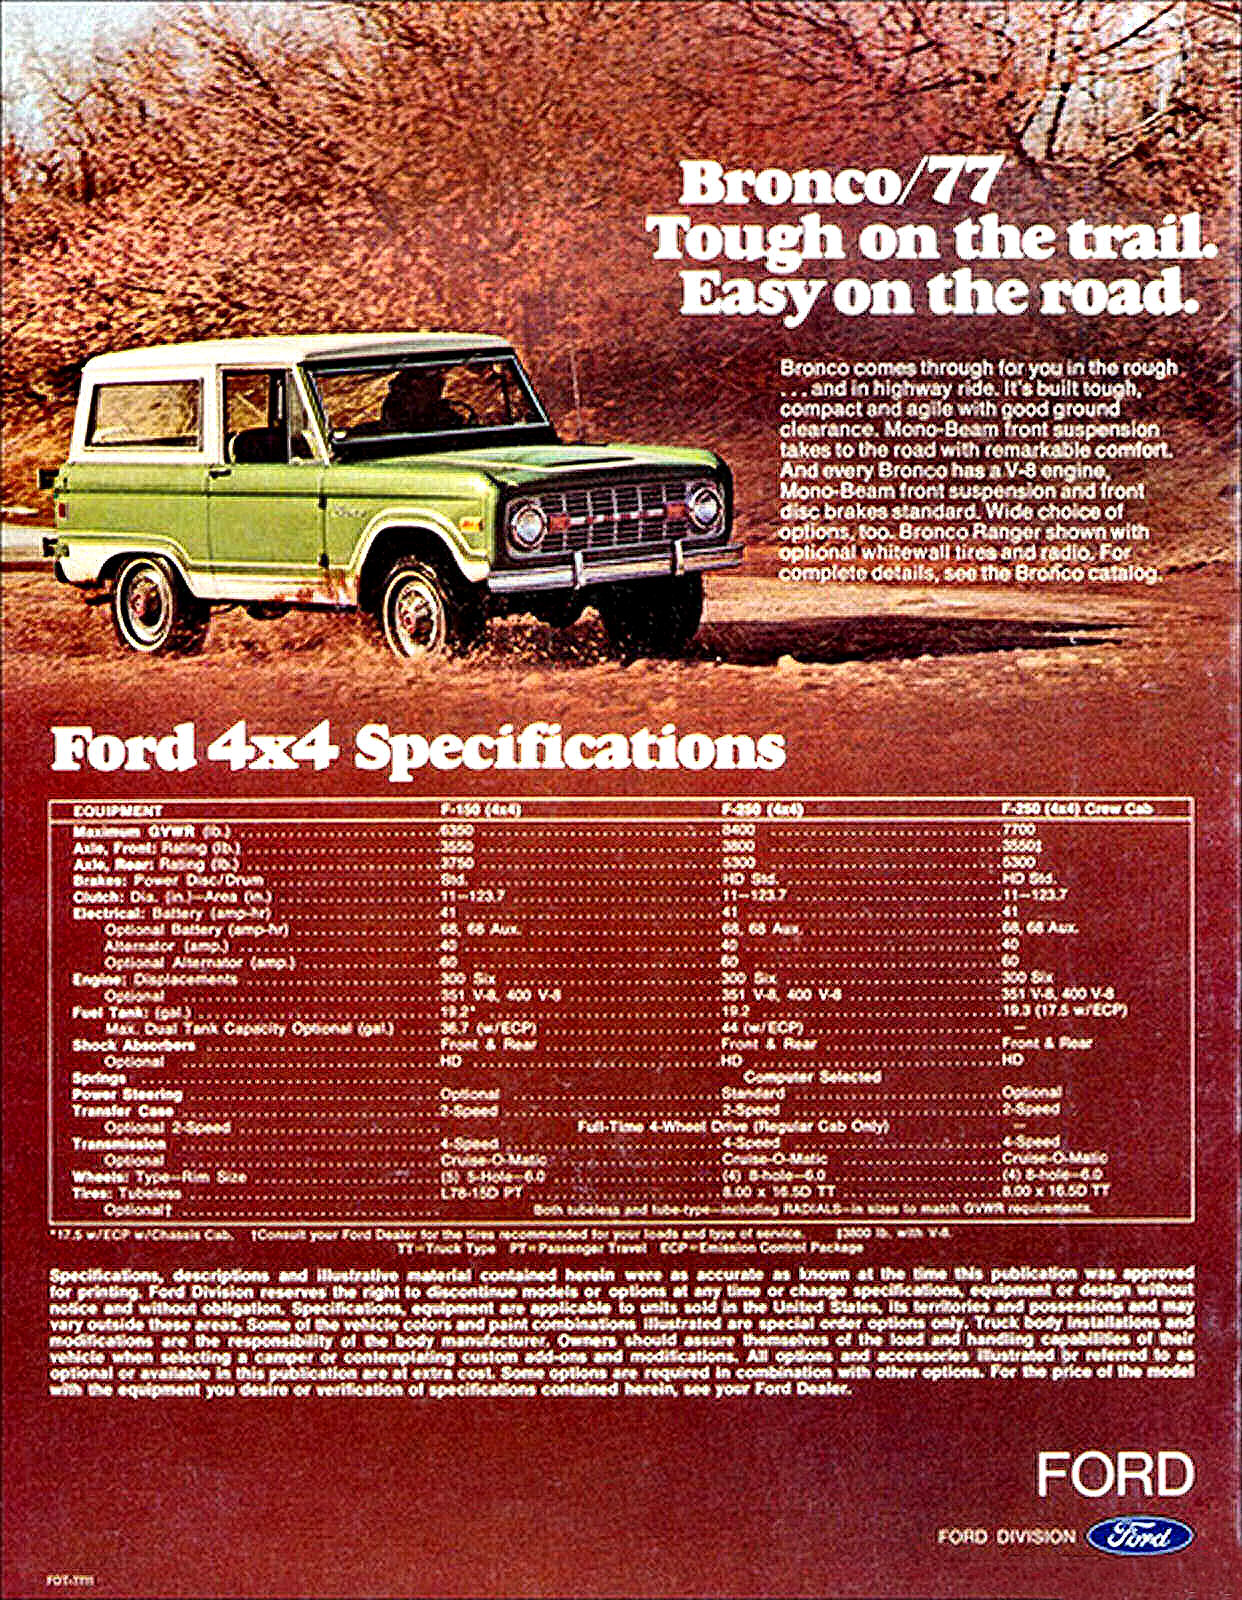 1977 Ford 4-Wheel Drives-06